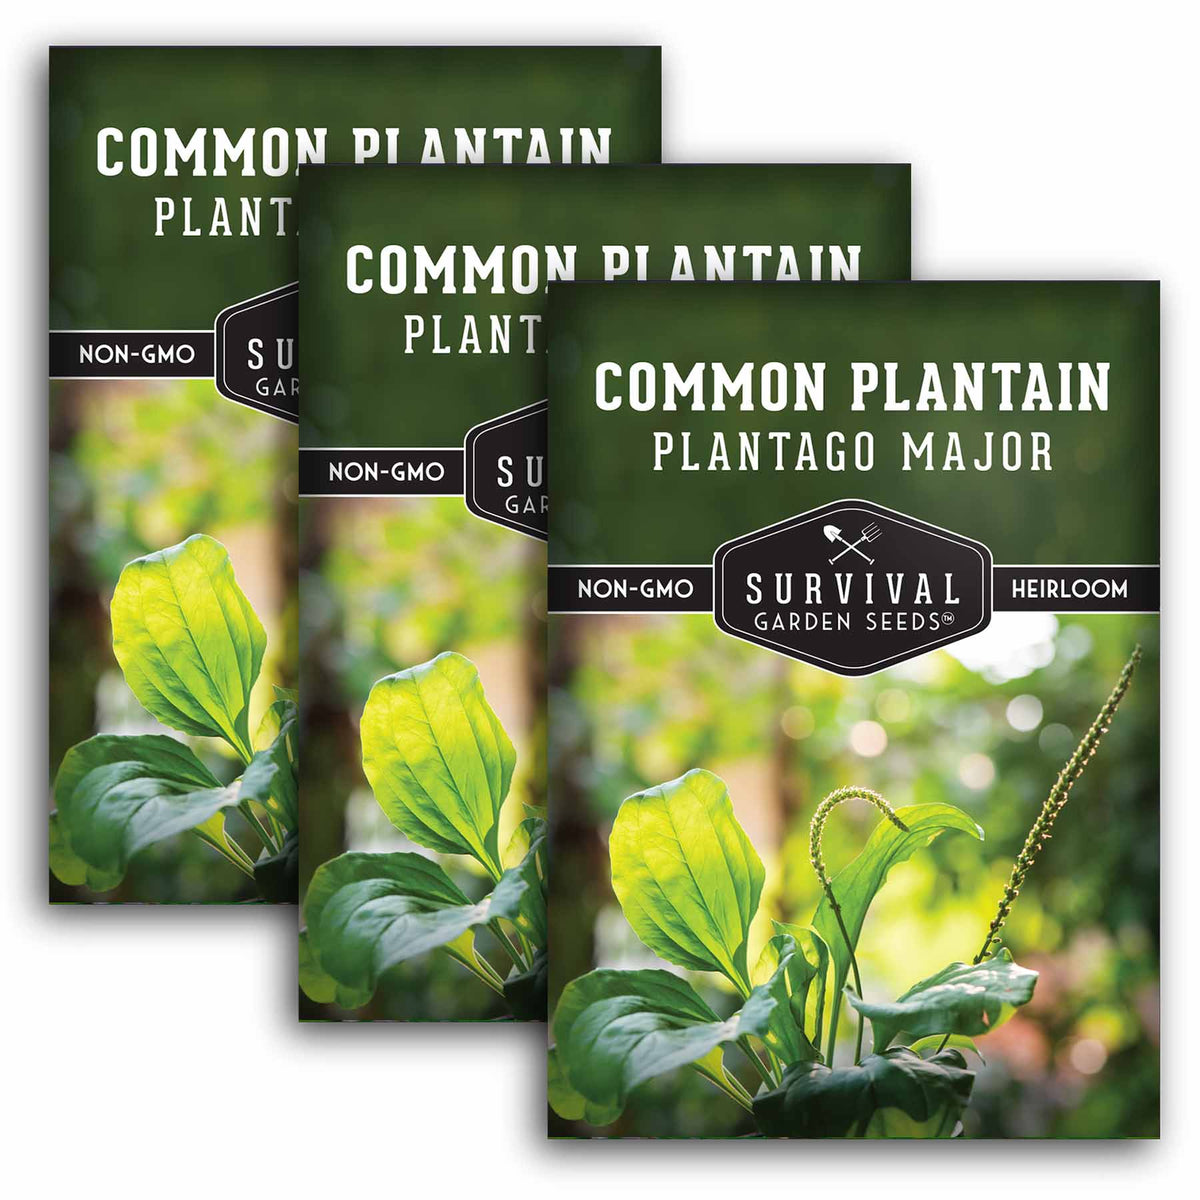 3 packets of Common Plantain seeds